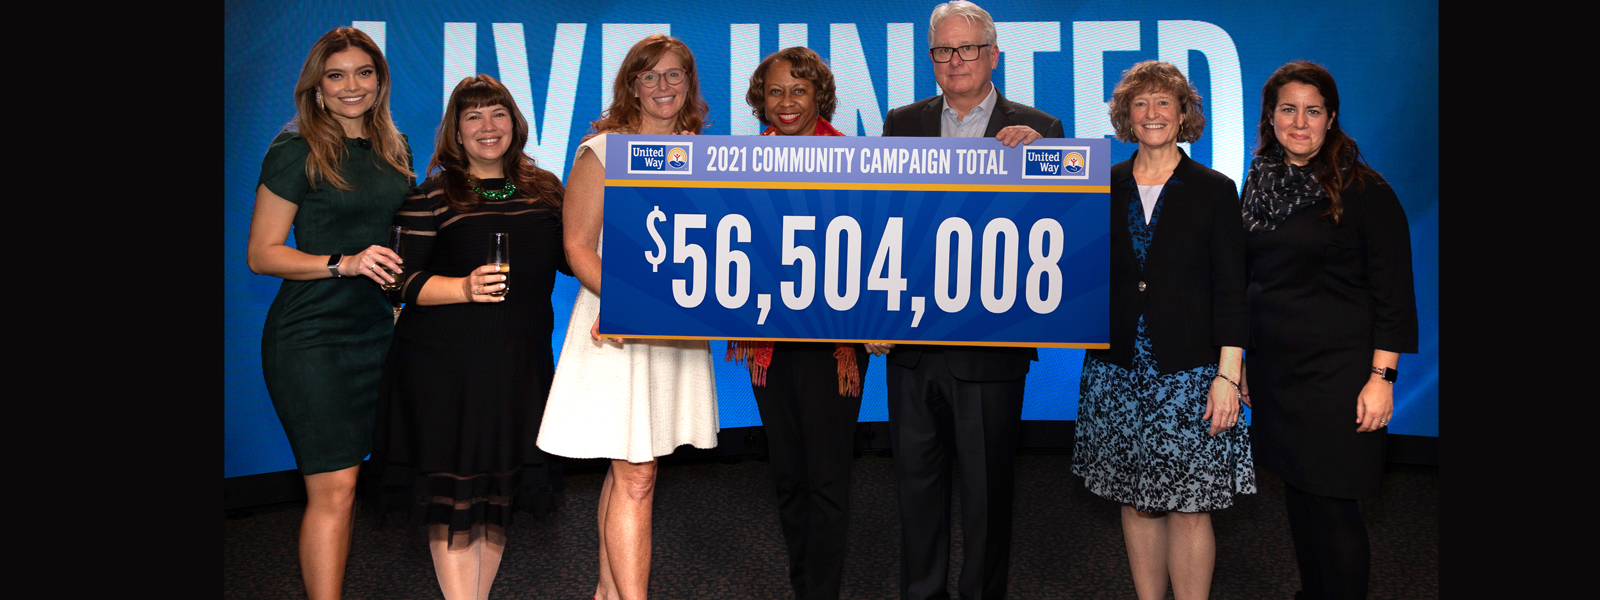 image of community leaders with $56,504,008 sign